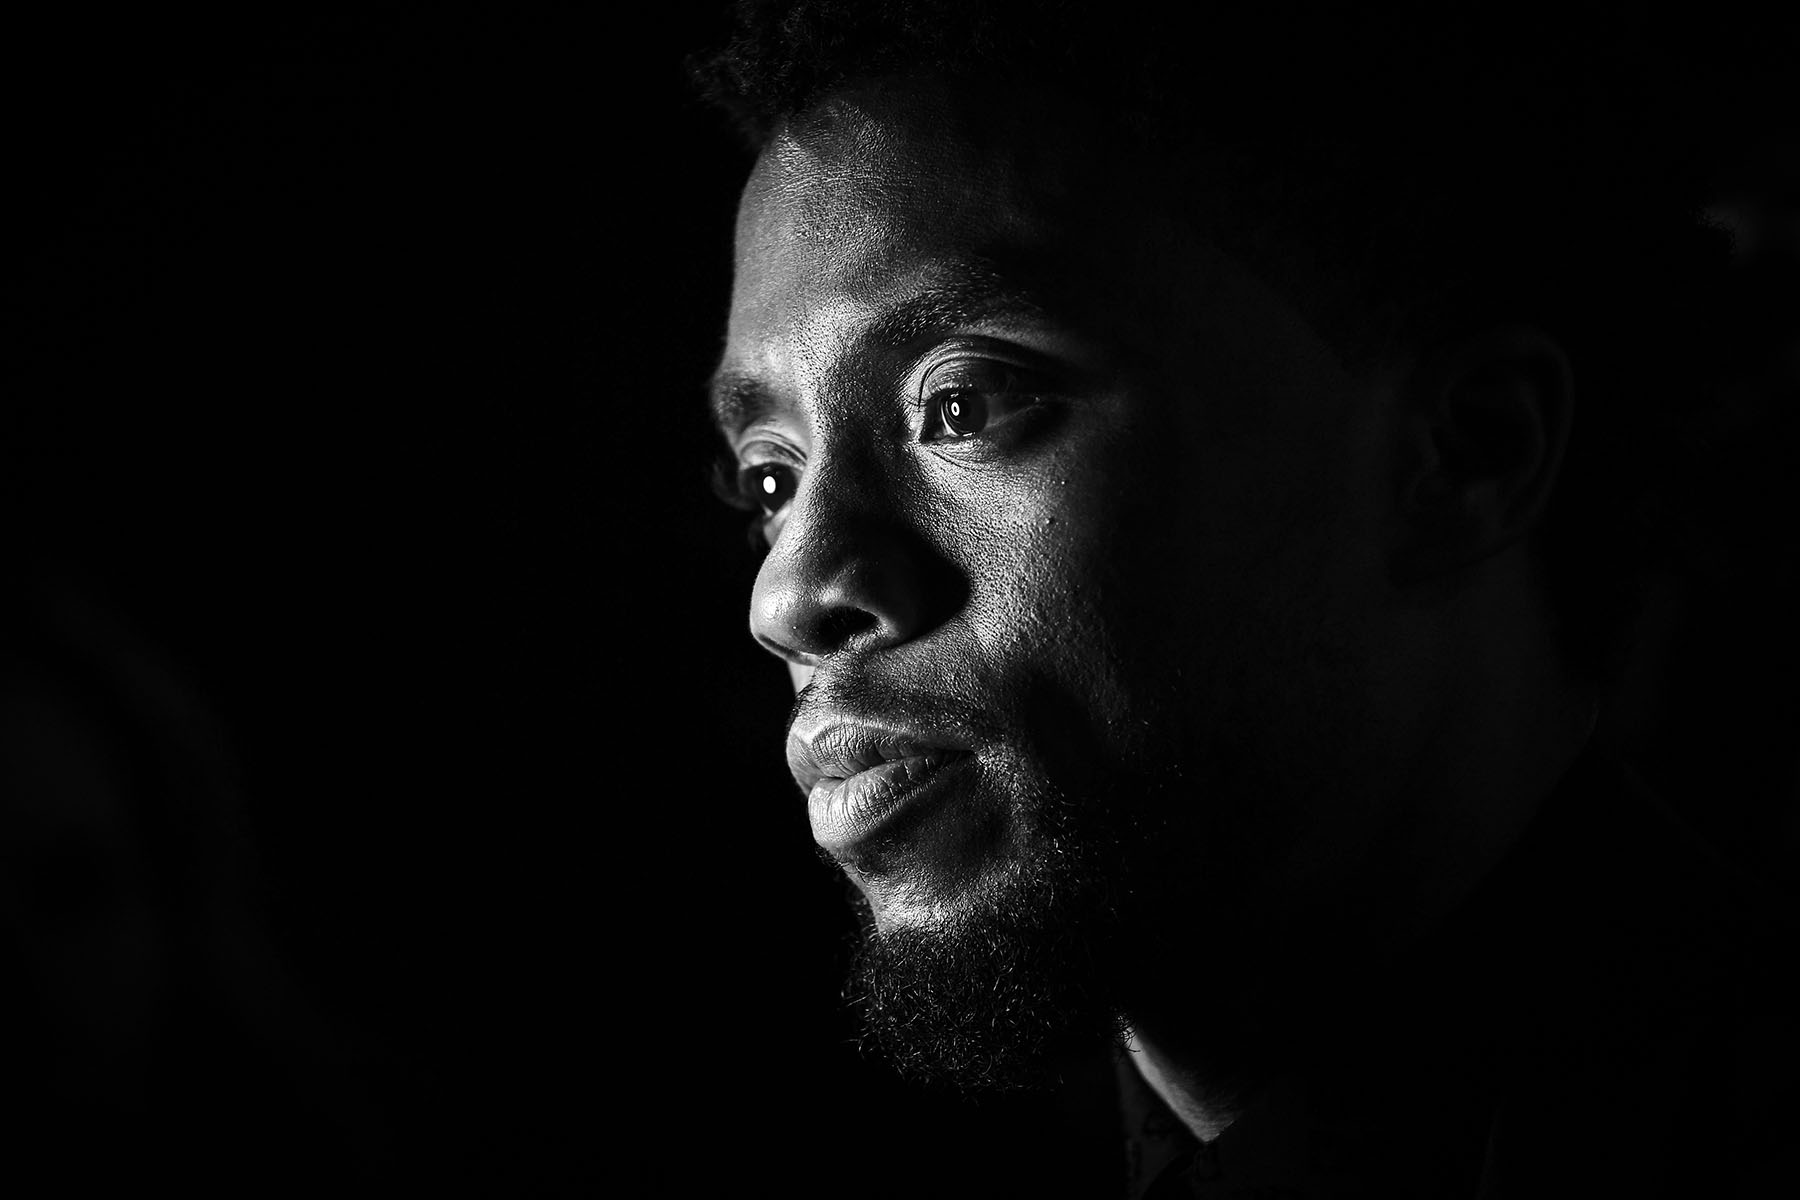 Black and white image of Chadwick Boseman attending the European Premiere of Black Panther in London in 2018.